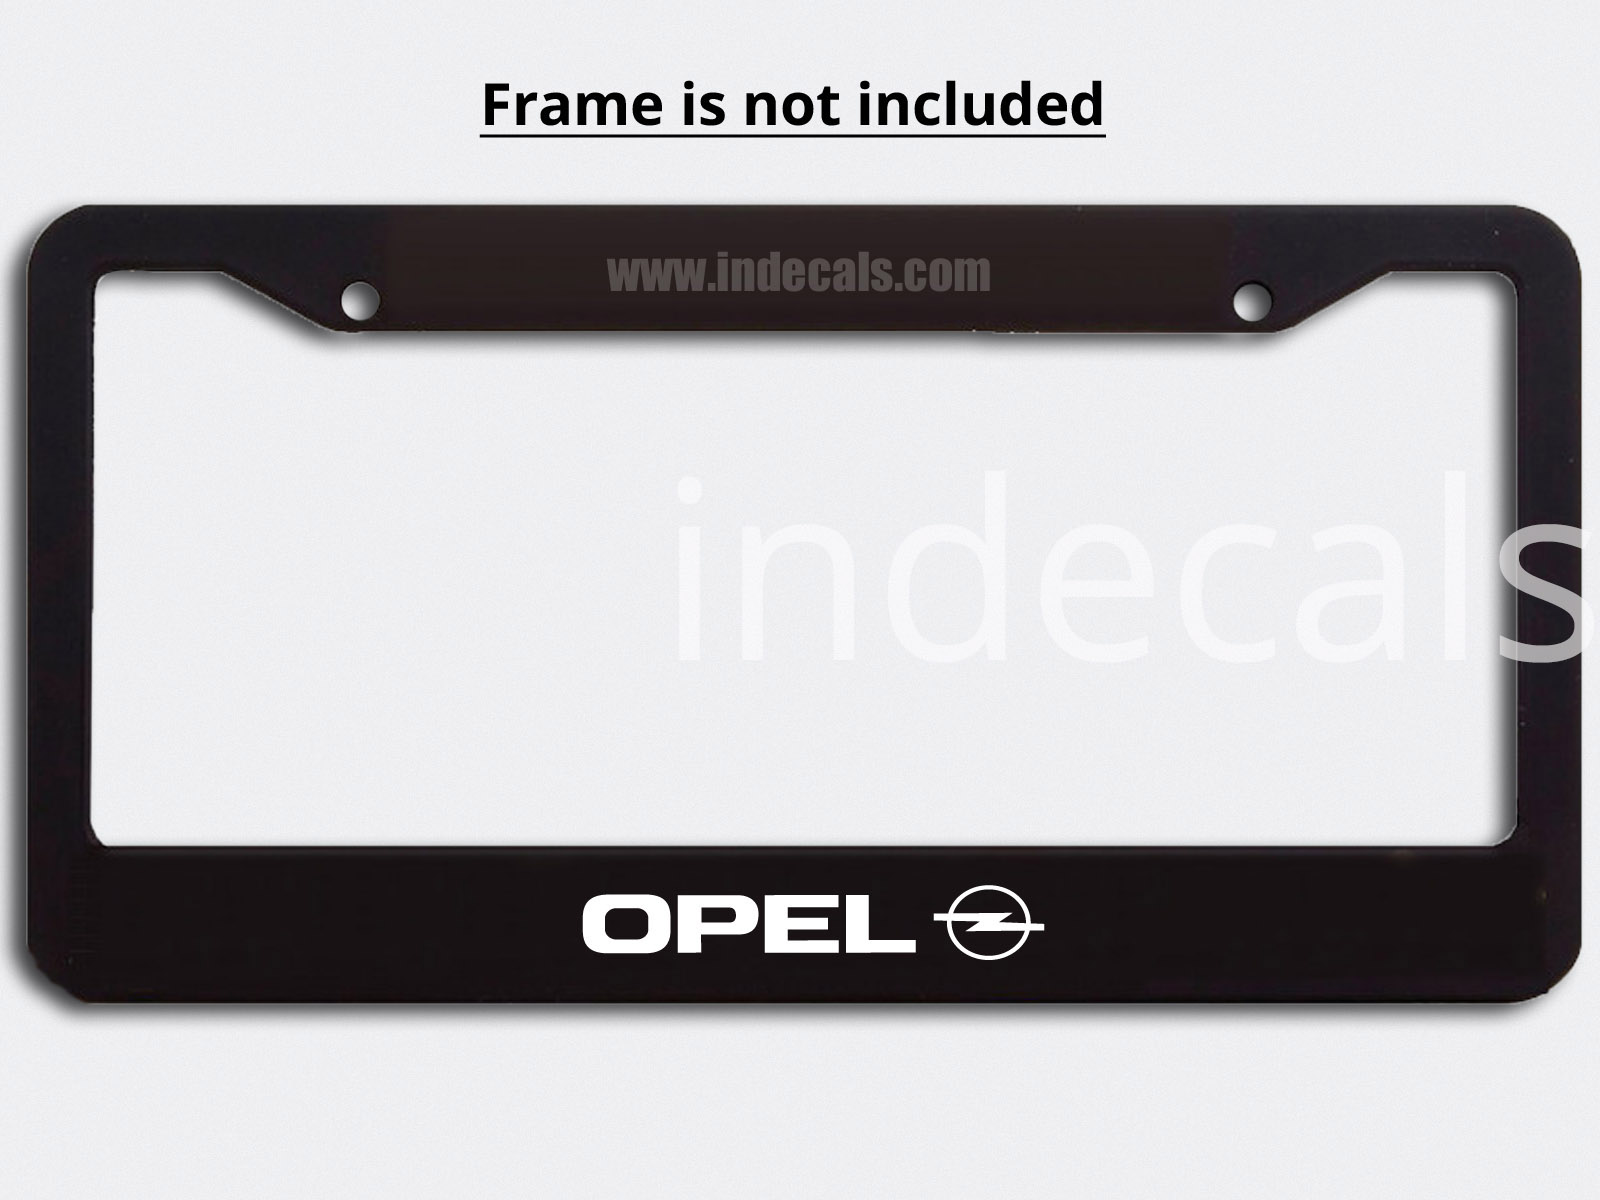 3 x Opel Stickers for Plate Frame - White